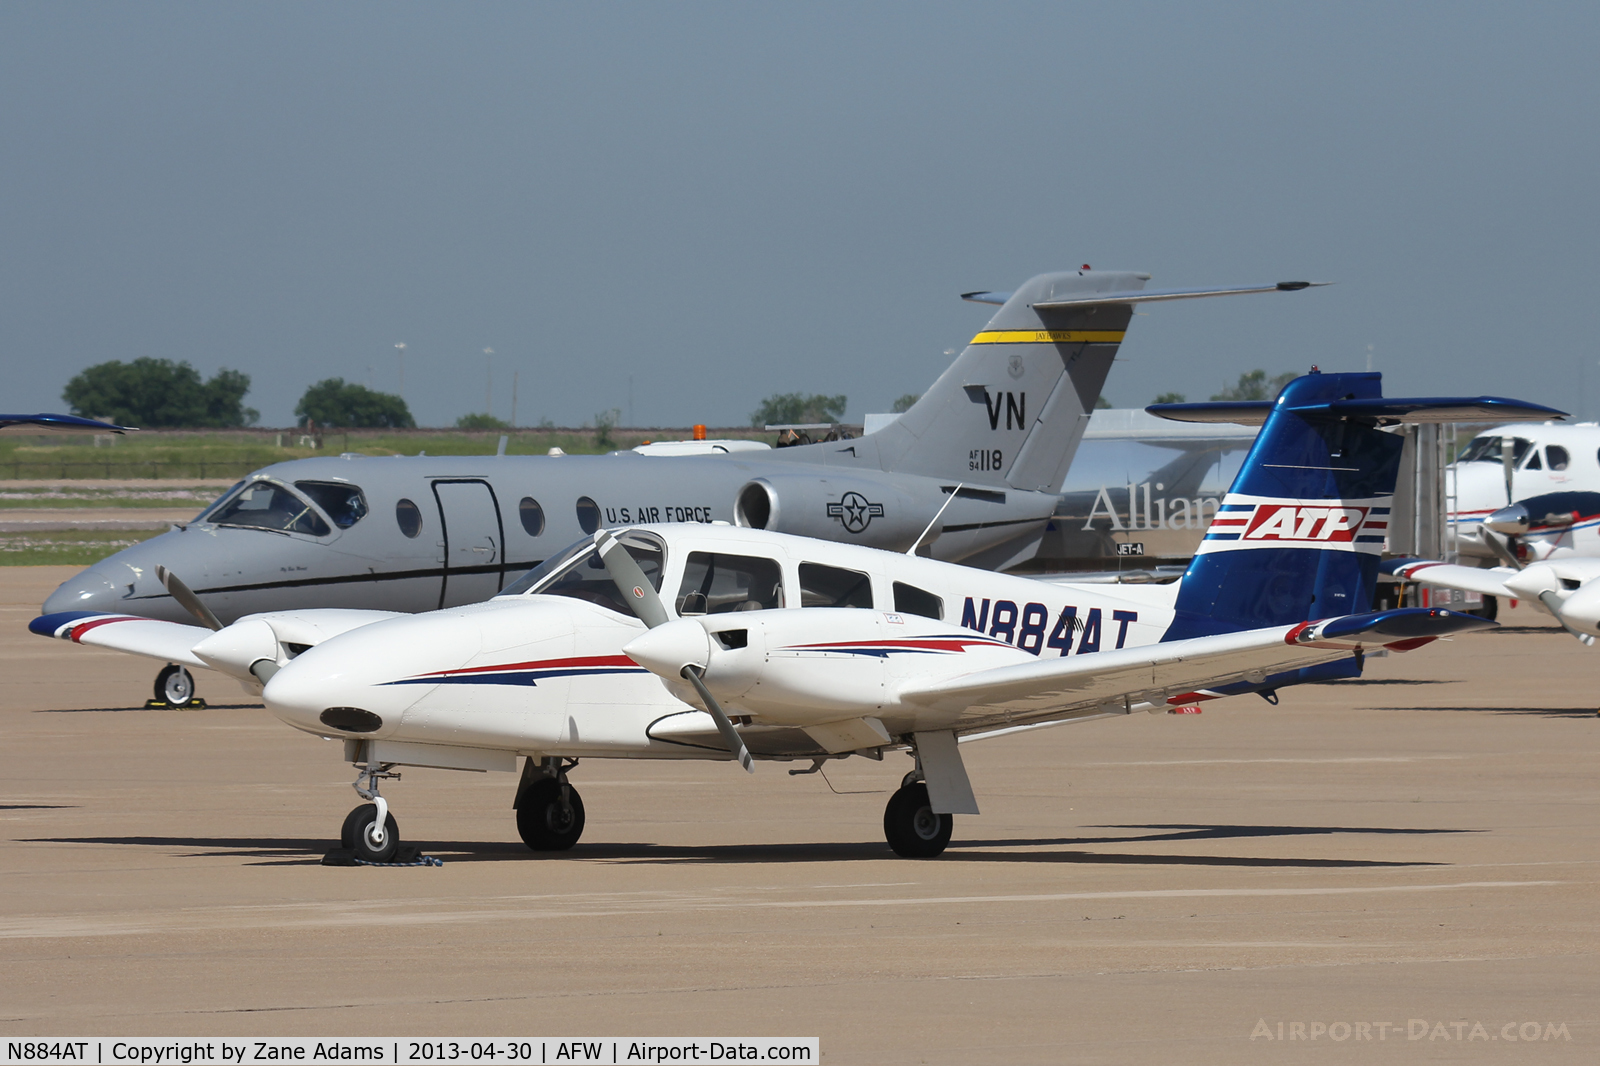 N884AT, 2012 Piper PA-44-180 Seminole C/N 4496321, At Alliance Airport - Fort Worth, TX